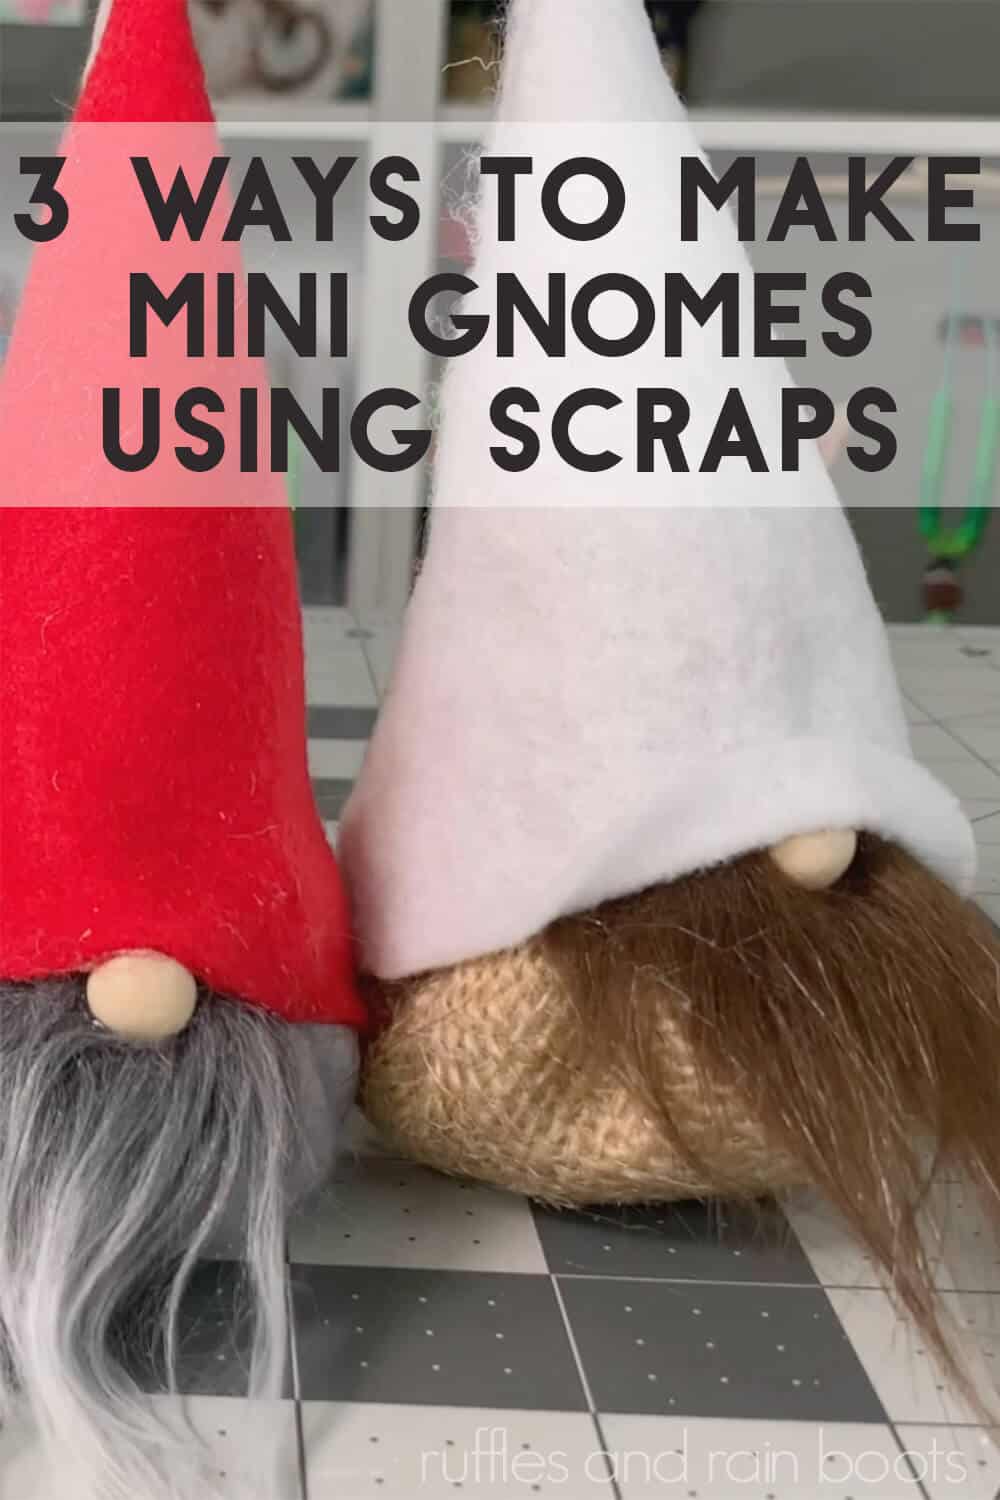 vertical image of close up gnomes in red and white hats with text which reads 3 ways to make mini gnomes using scraps